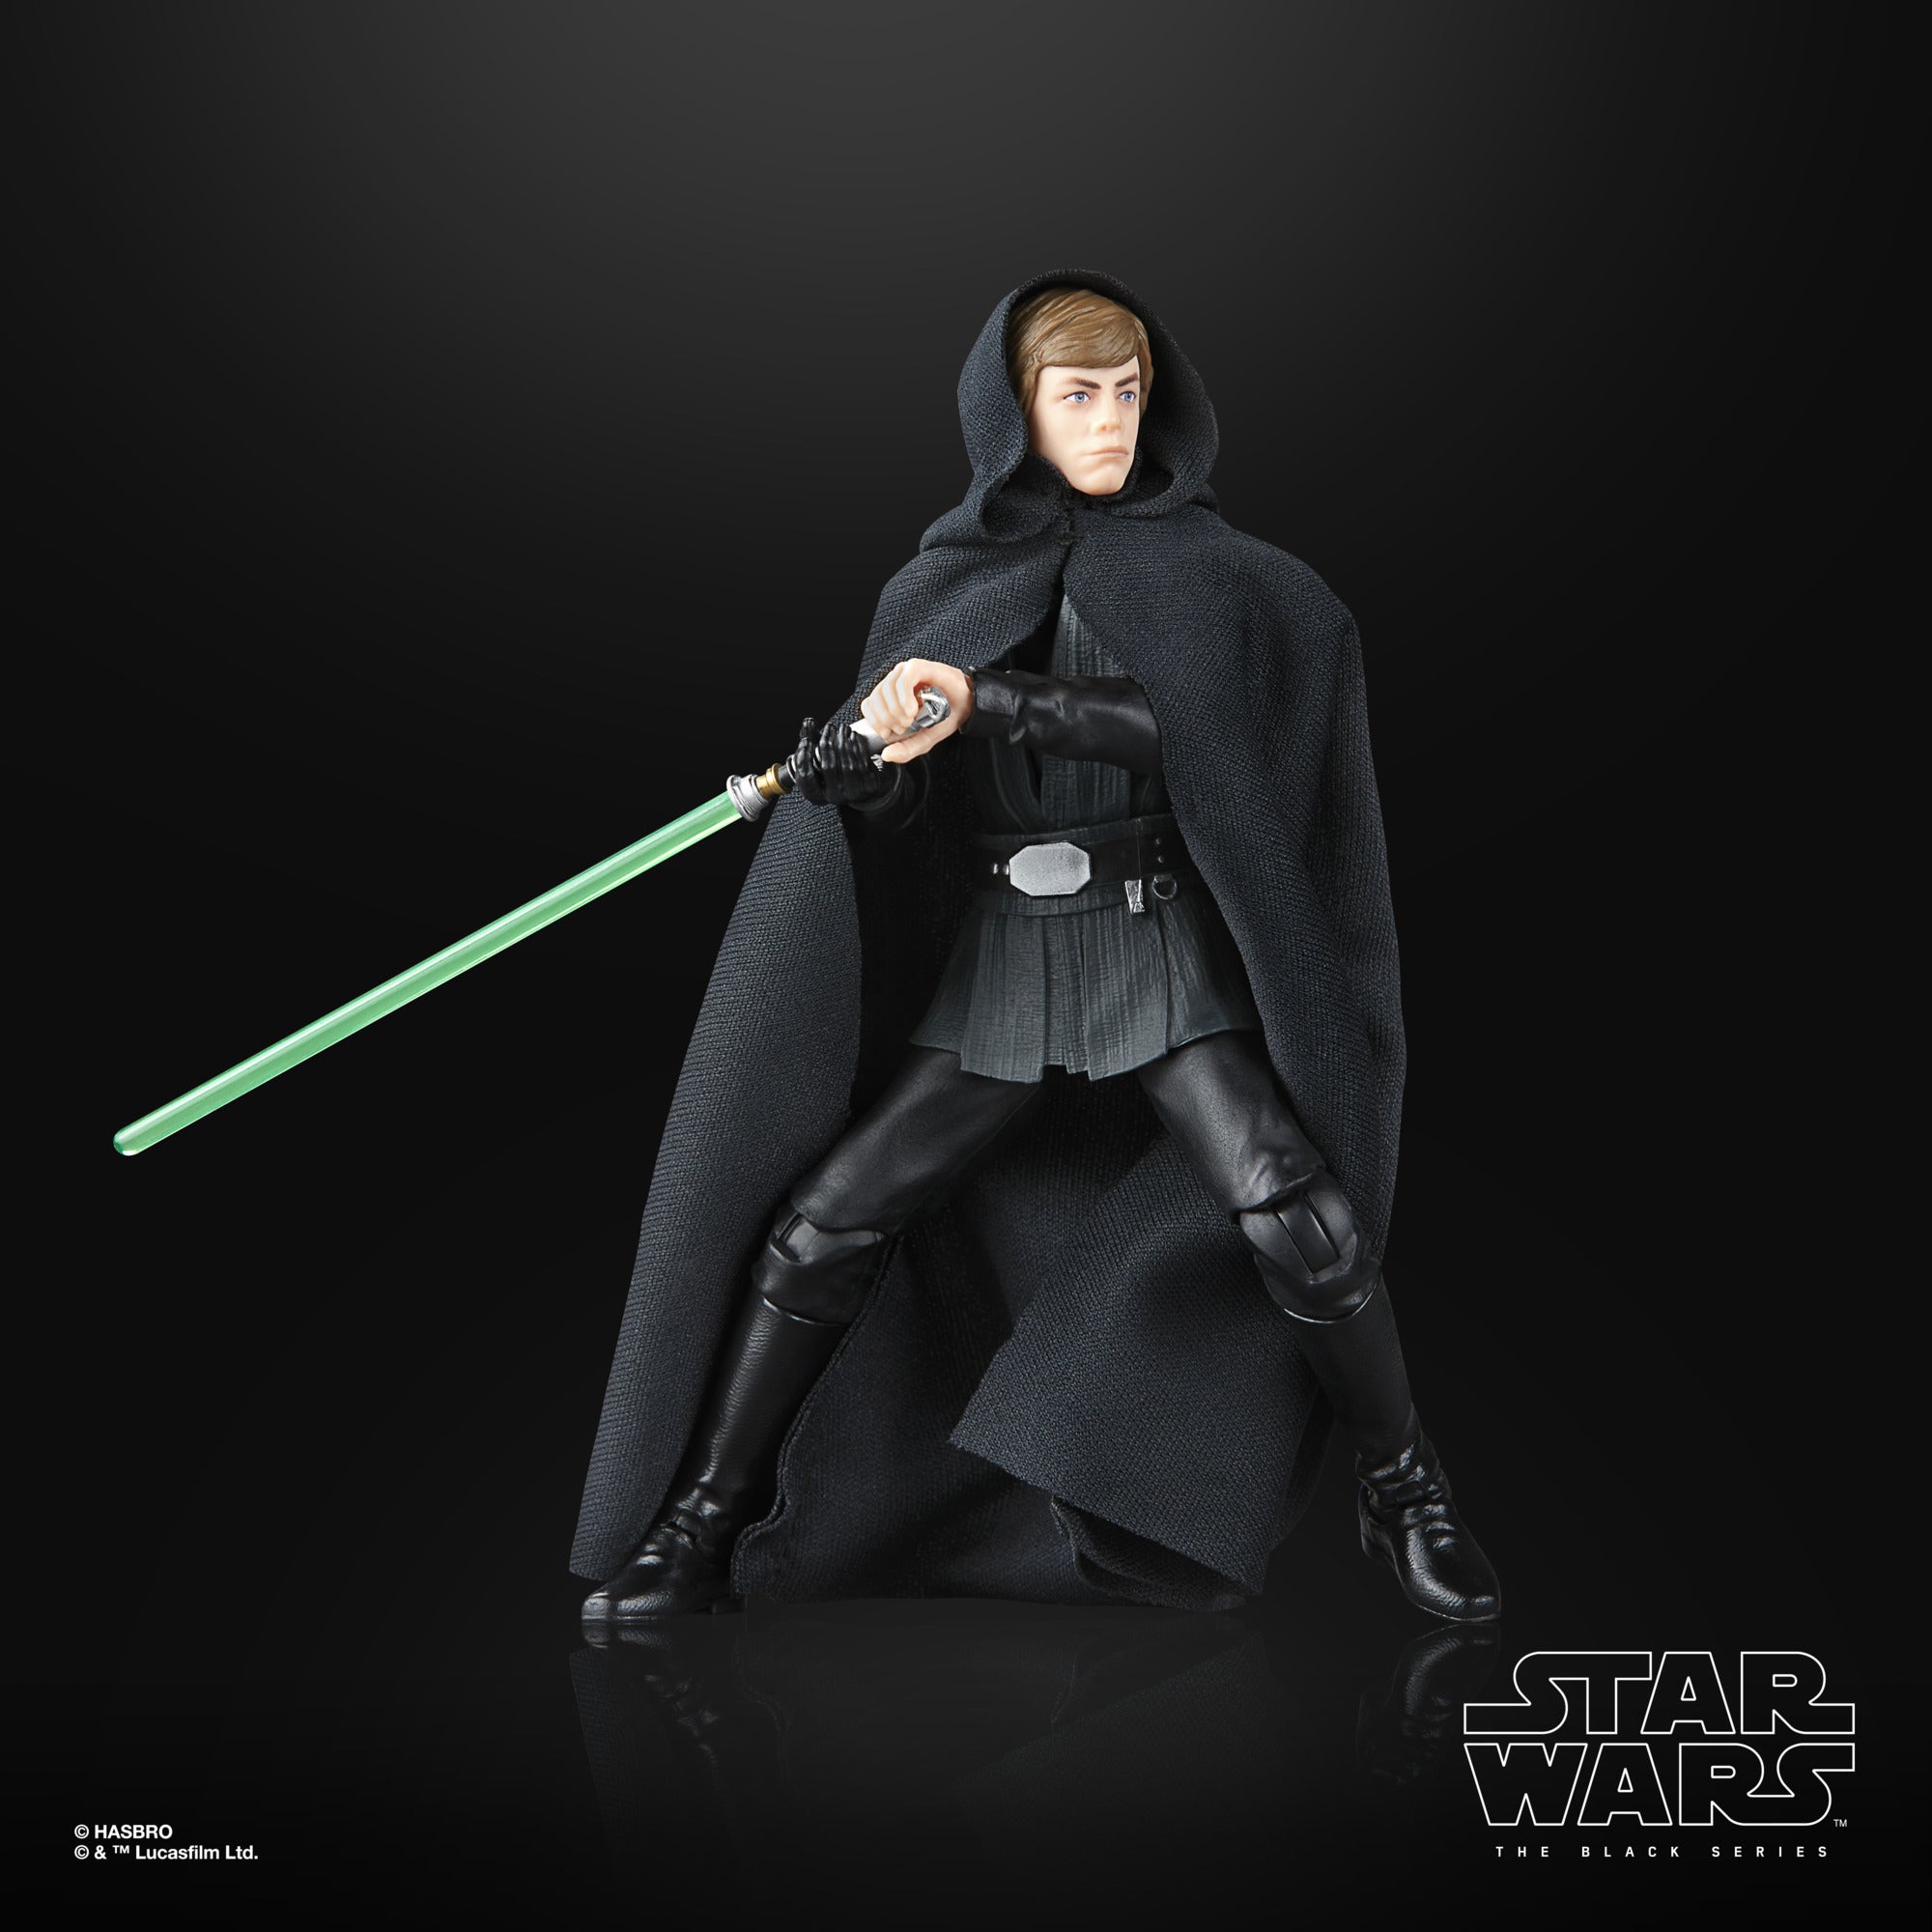 Star Wars The Black Series Archive Collection: The Mandalorian - Luke Skywalker Crucero Ligero Imperial